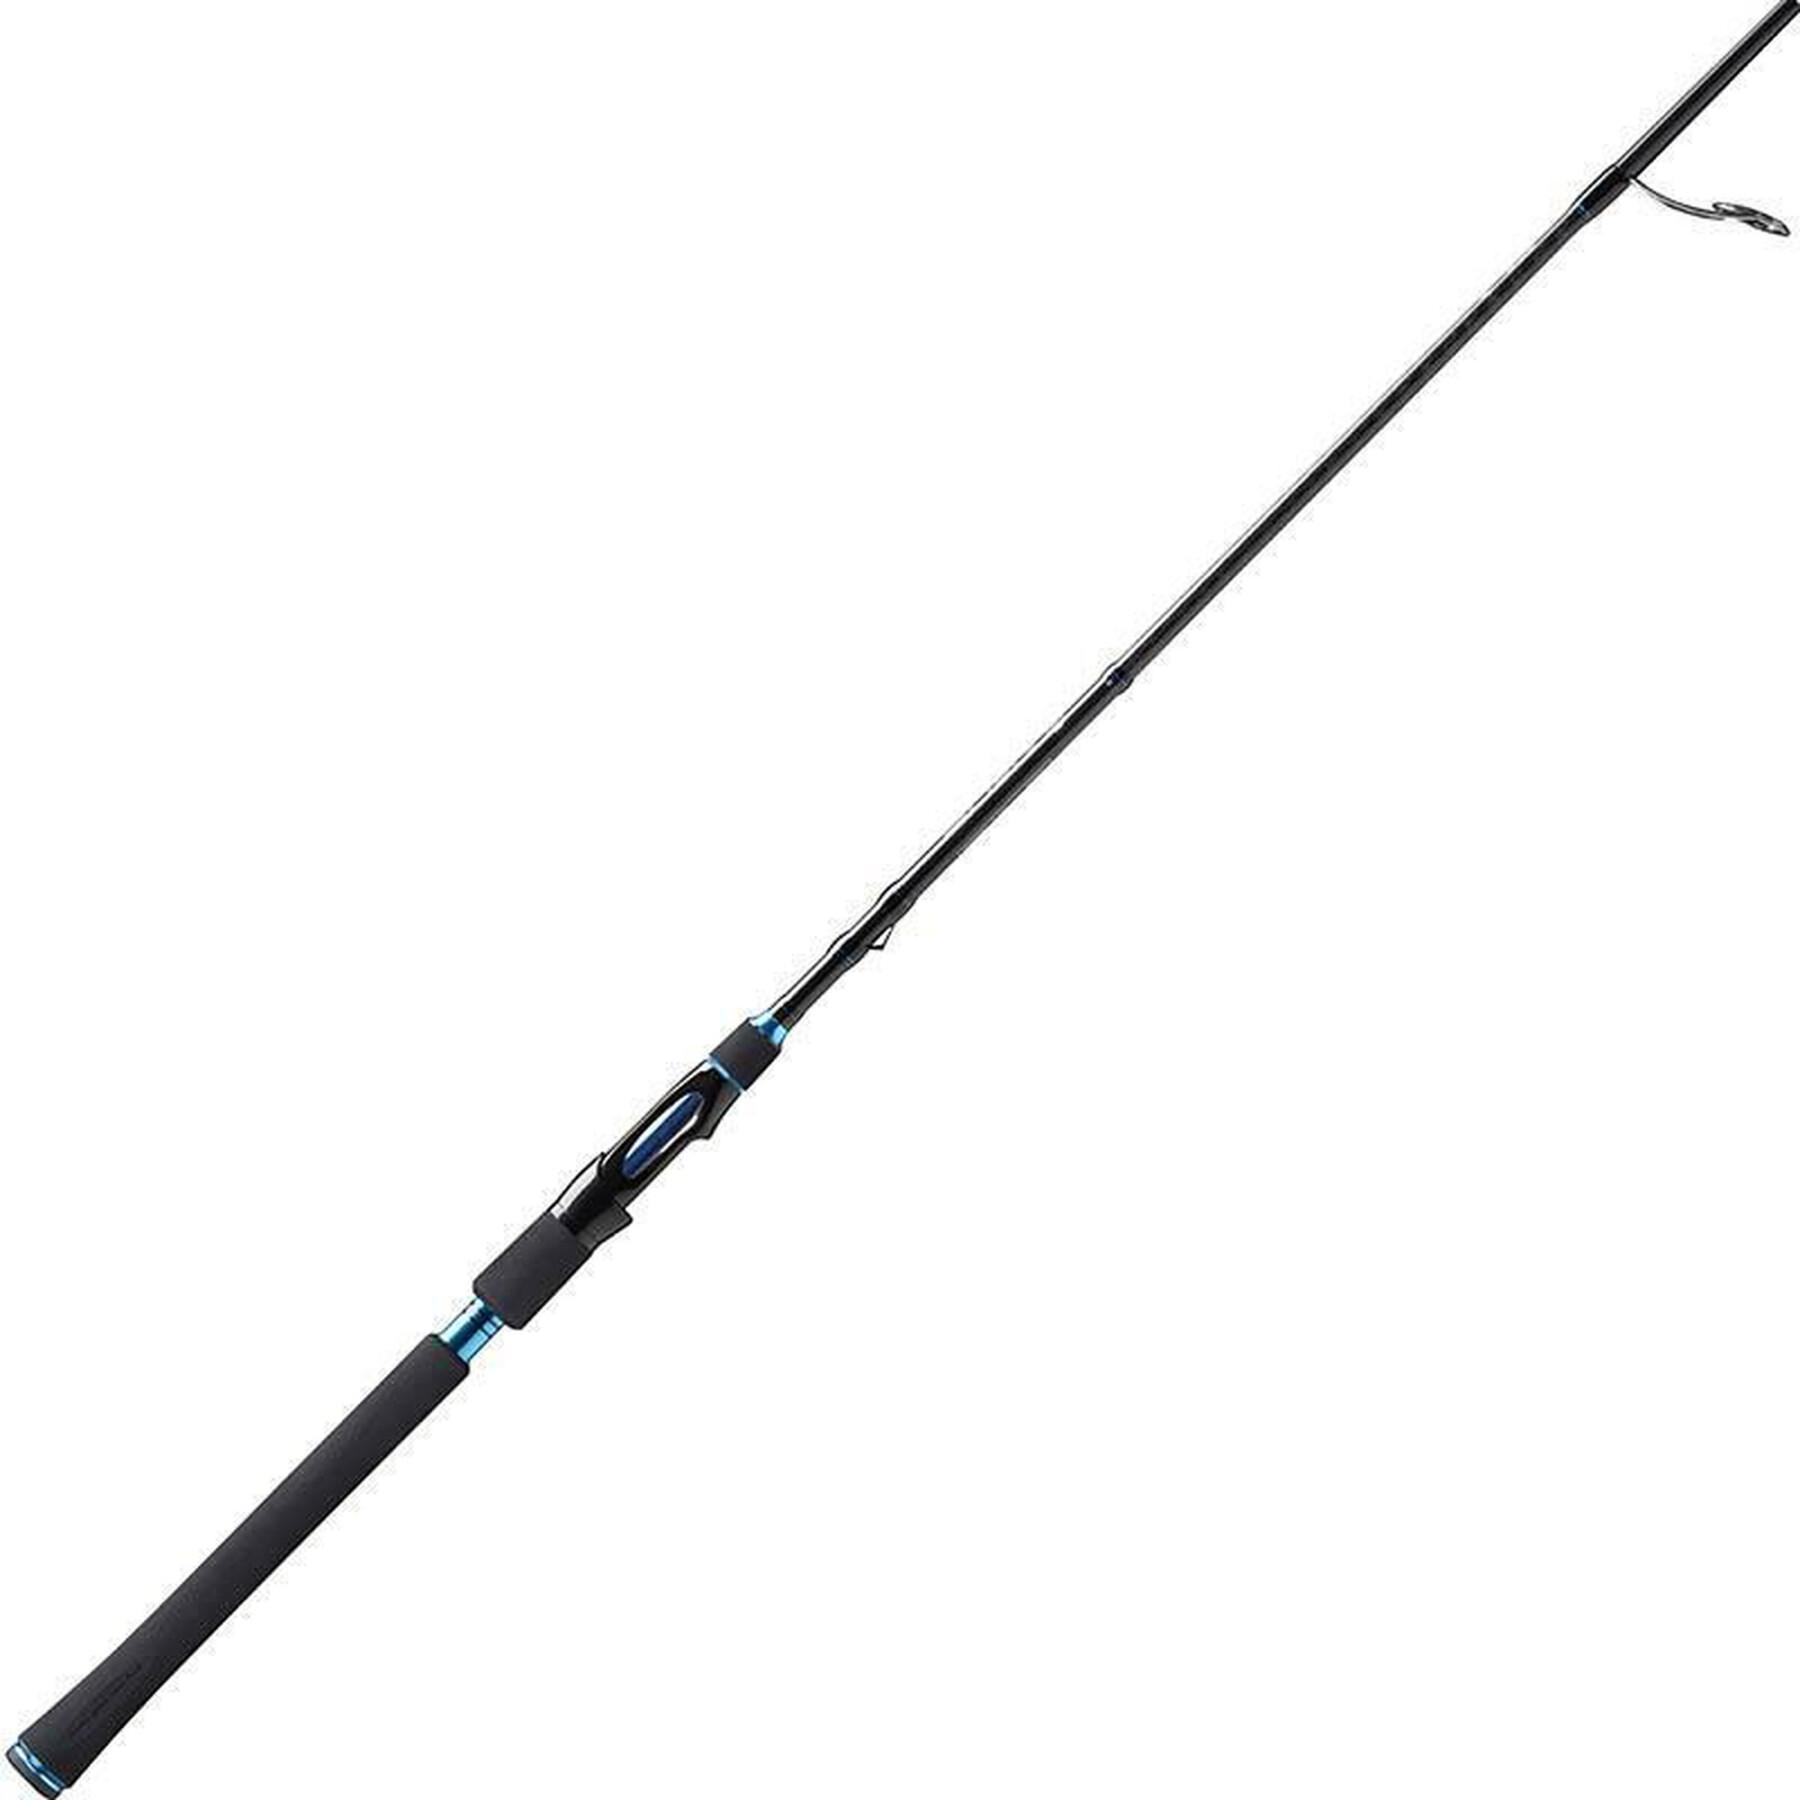 Cane 13 Fishing Omen S Spin 2,1m 20-80g - Spinning - Rods - Sea